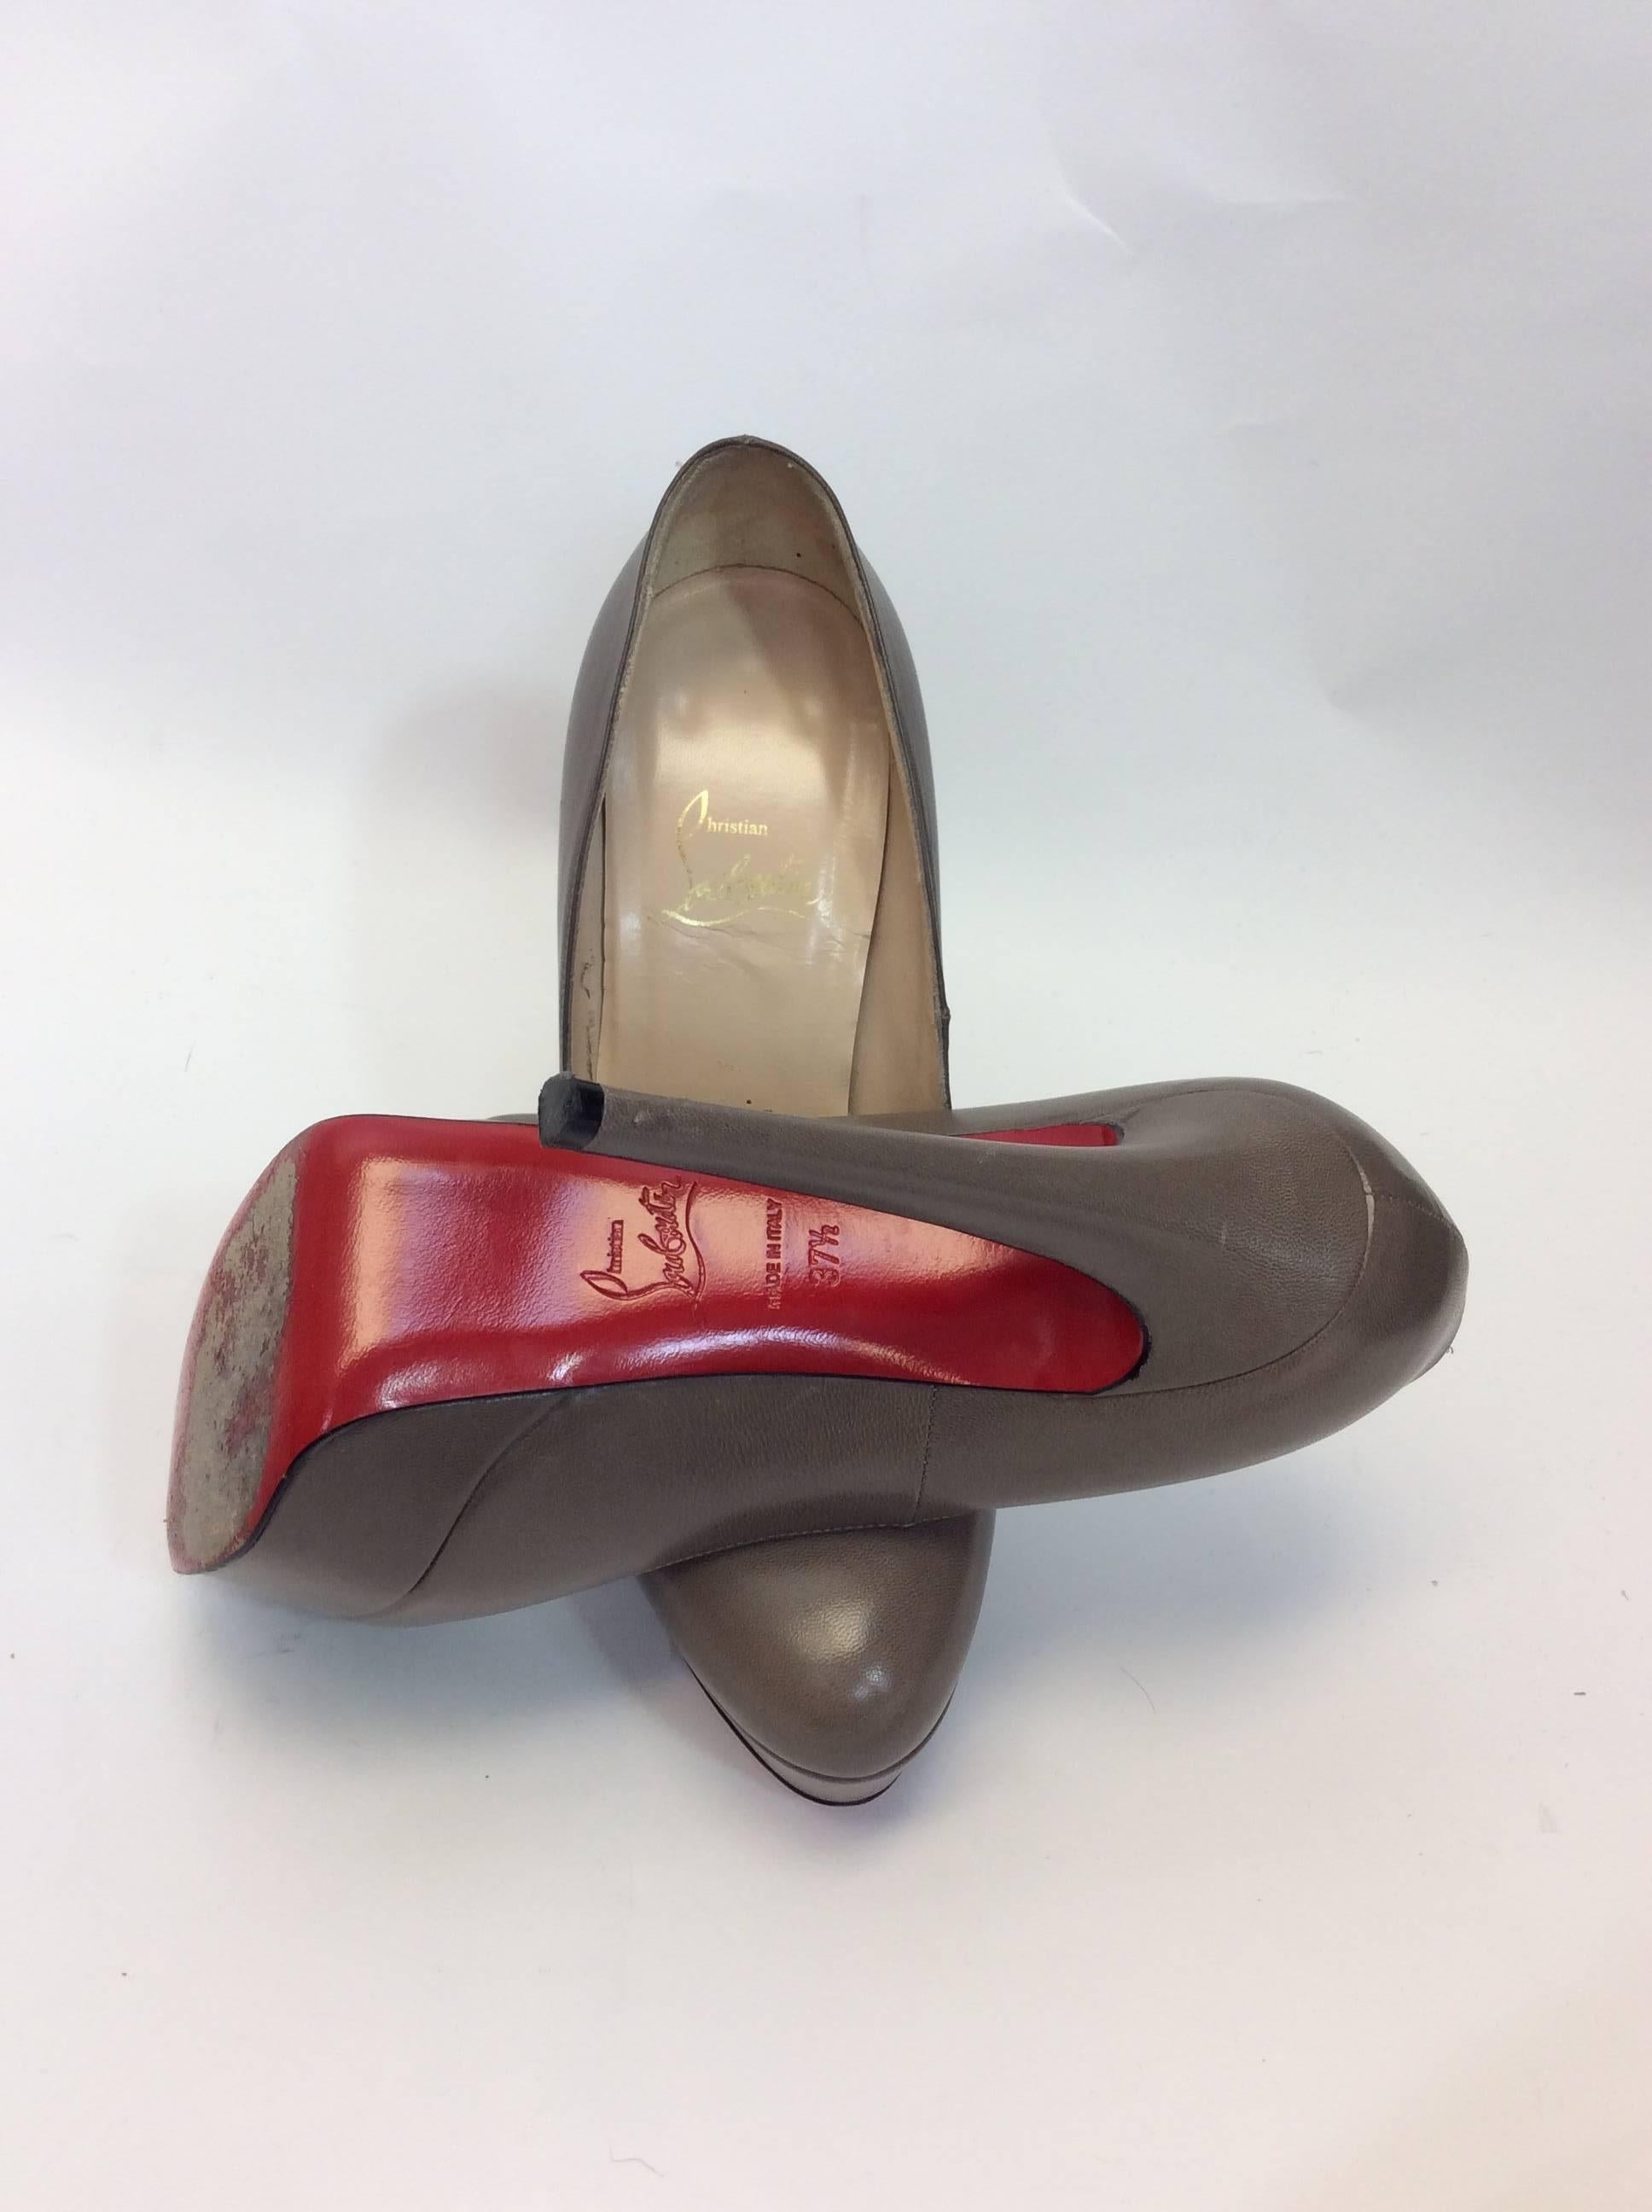 Christian Louboutin Gray Leather Platform Pumps In Excellent Condition For Sale In Narberth, PA